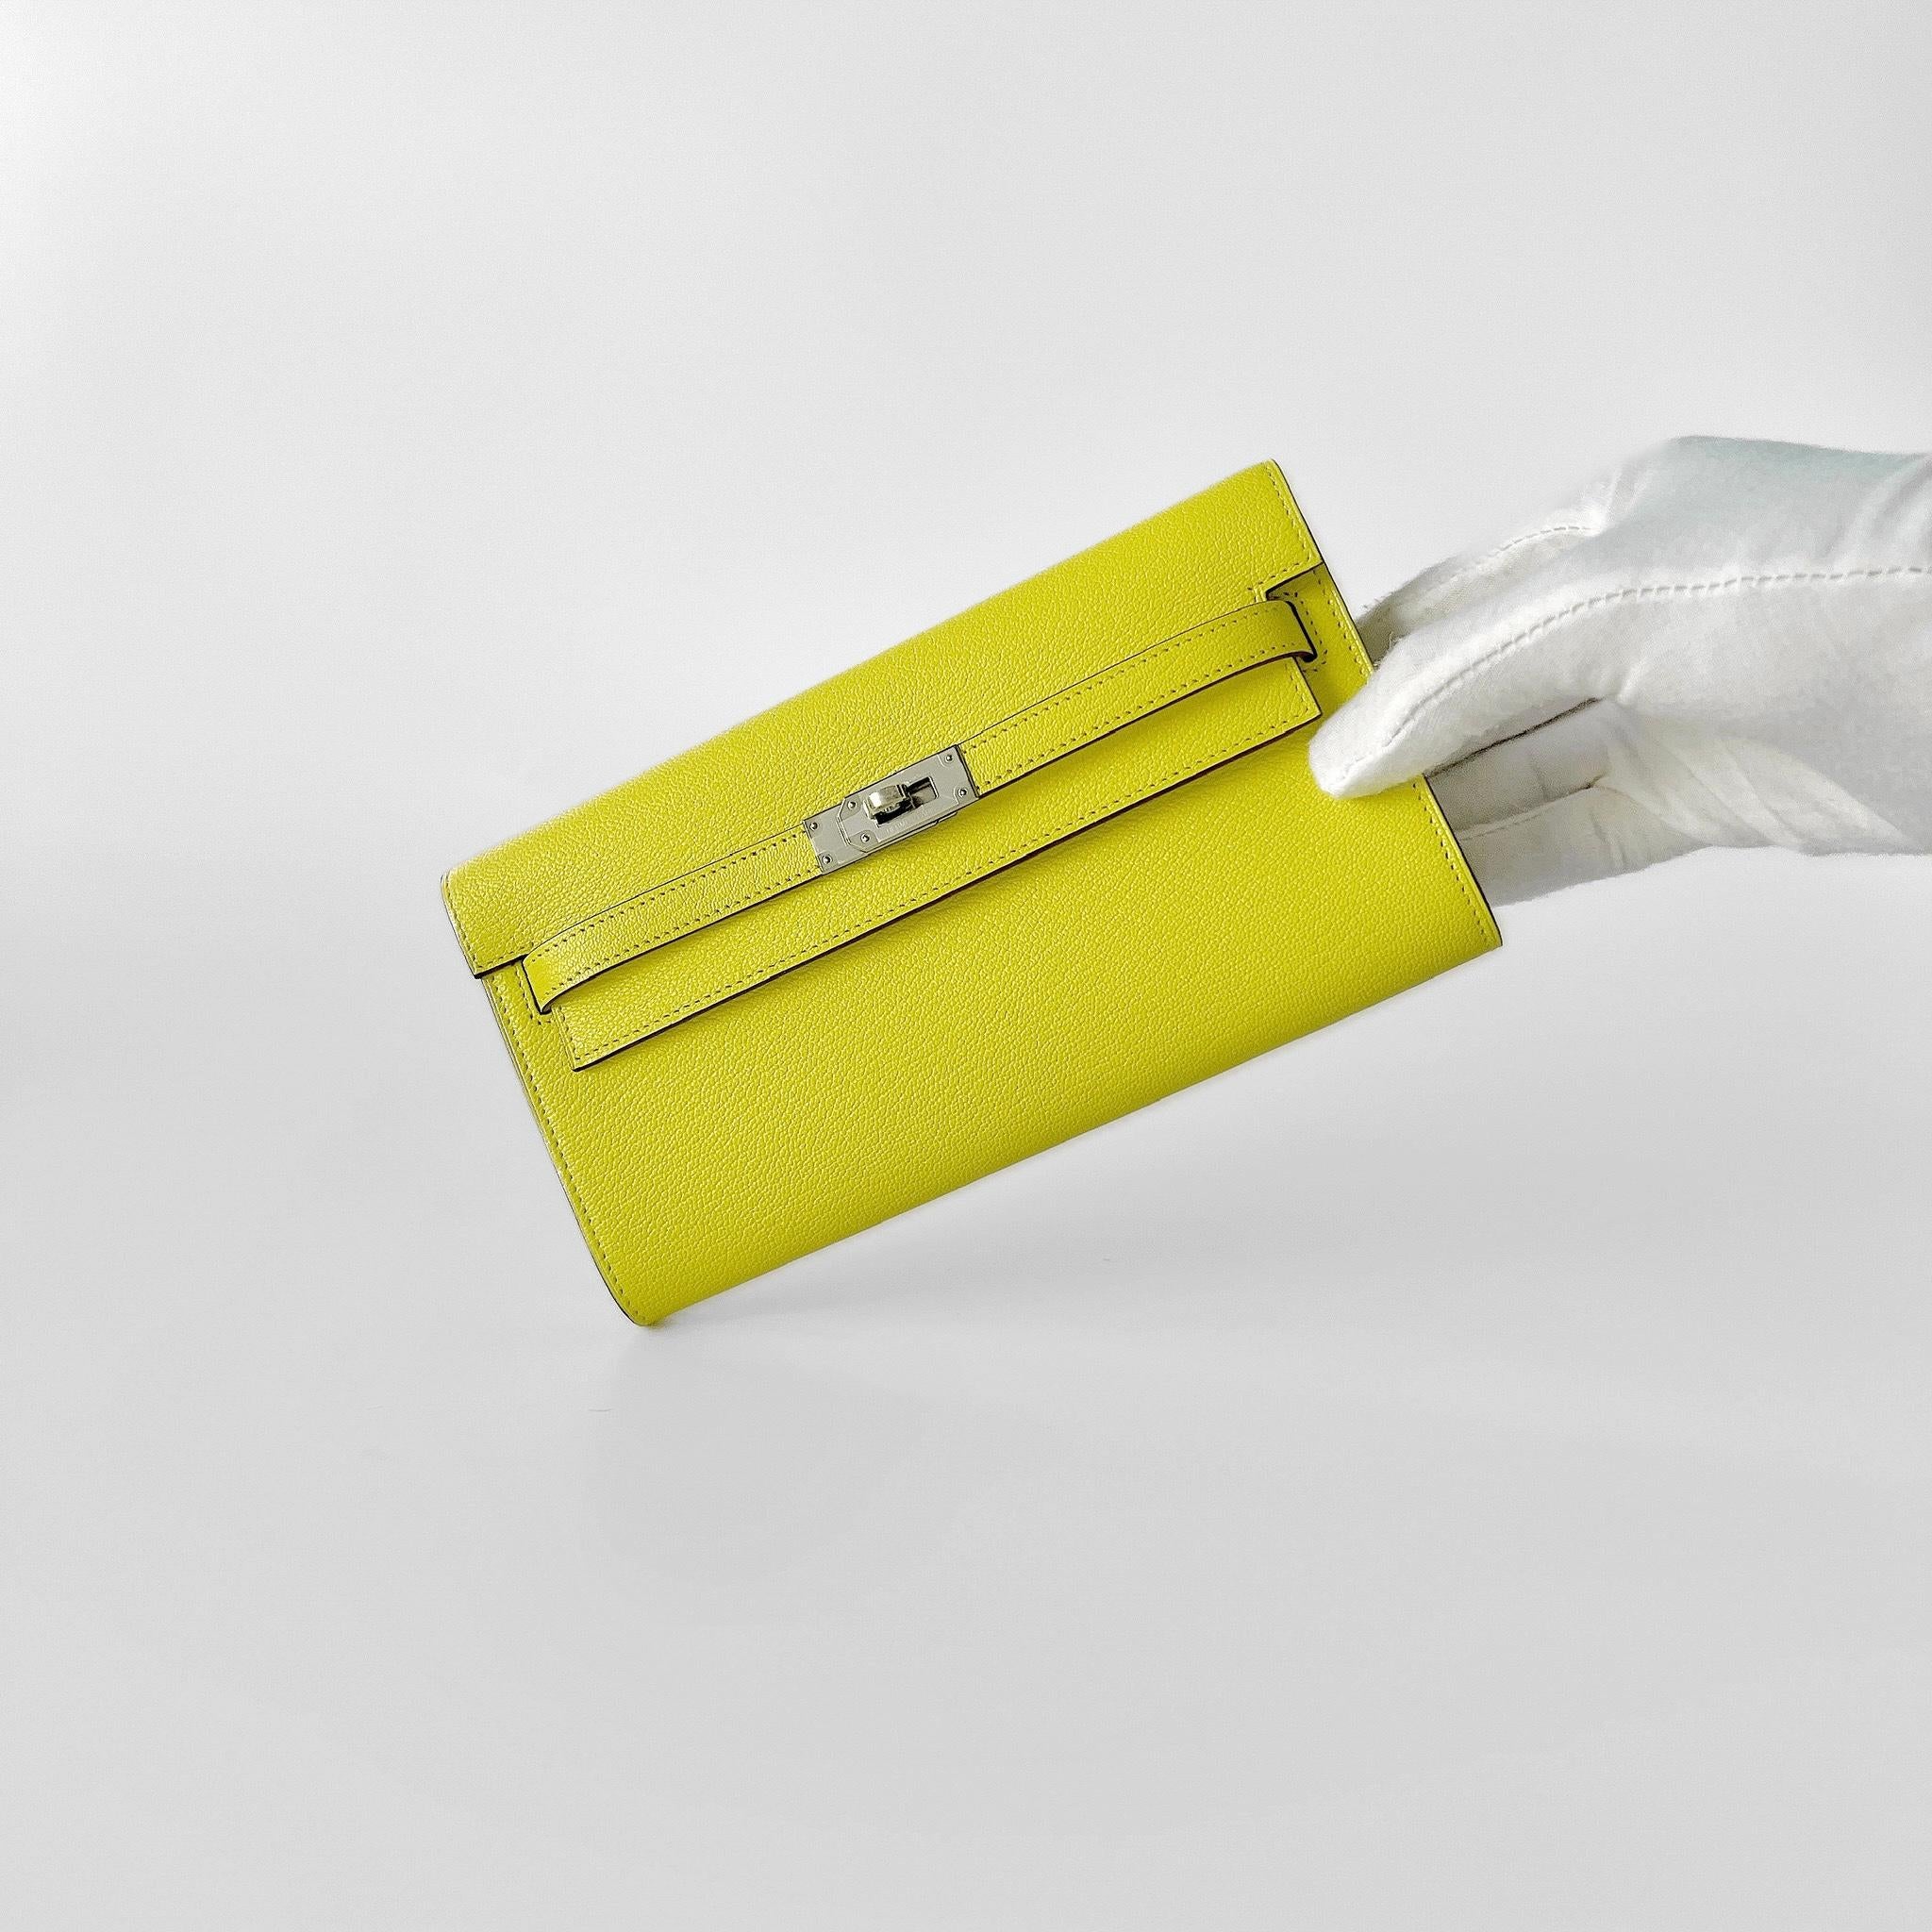 Shop this eye catching Hermes Kelly Classique To Go Wallet, In Jaune Citron With Palladium Hardware. It is crafted in Epsom Leather and comes with a strap which makes the wallet usable as both a clutch and a bag. There are 4 credit card slots and a